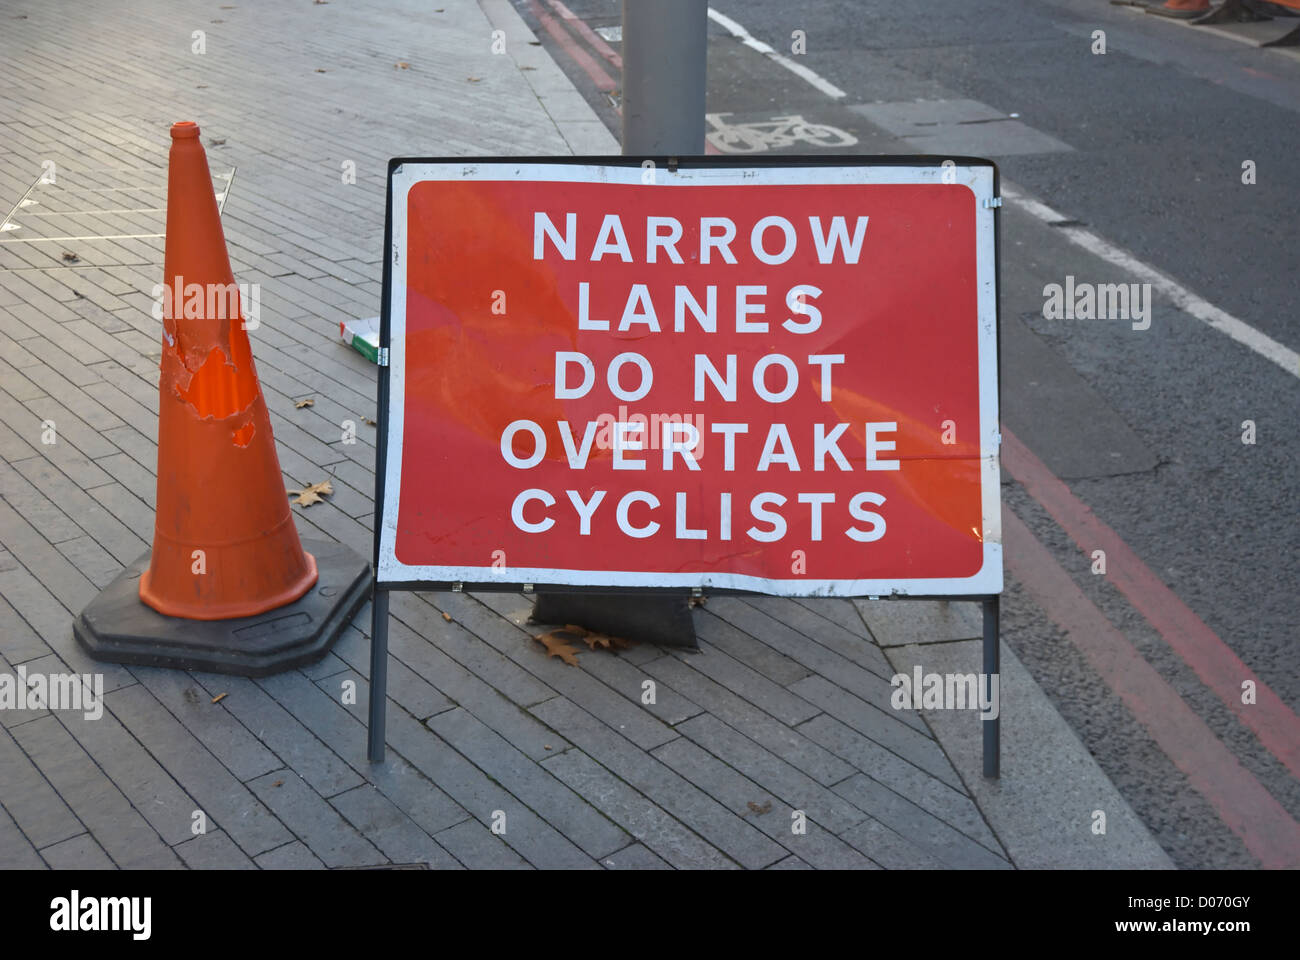 narrow lanes do not overtake cyclists road sign in southwark, london, england Stock Photo